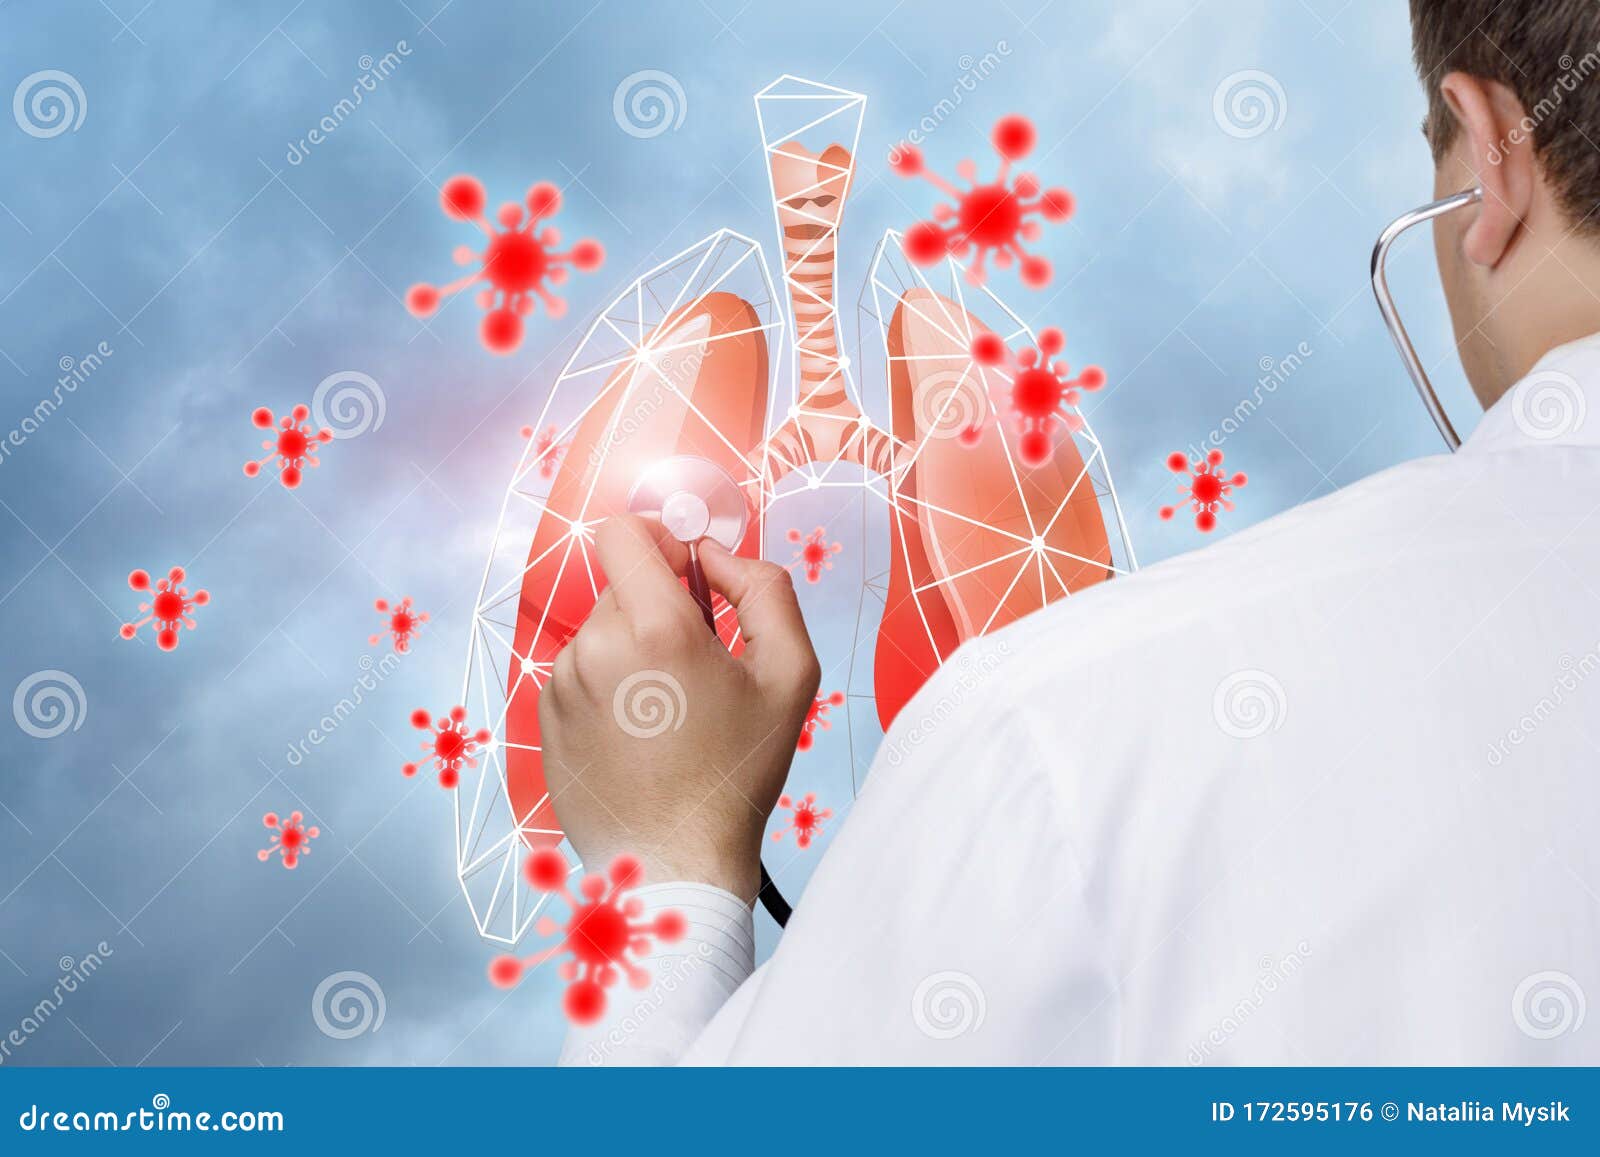 concept of treatment of viral diseases of the respiratory tract and lungs